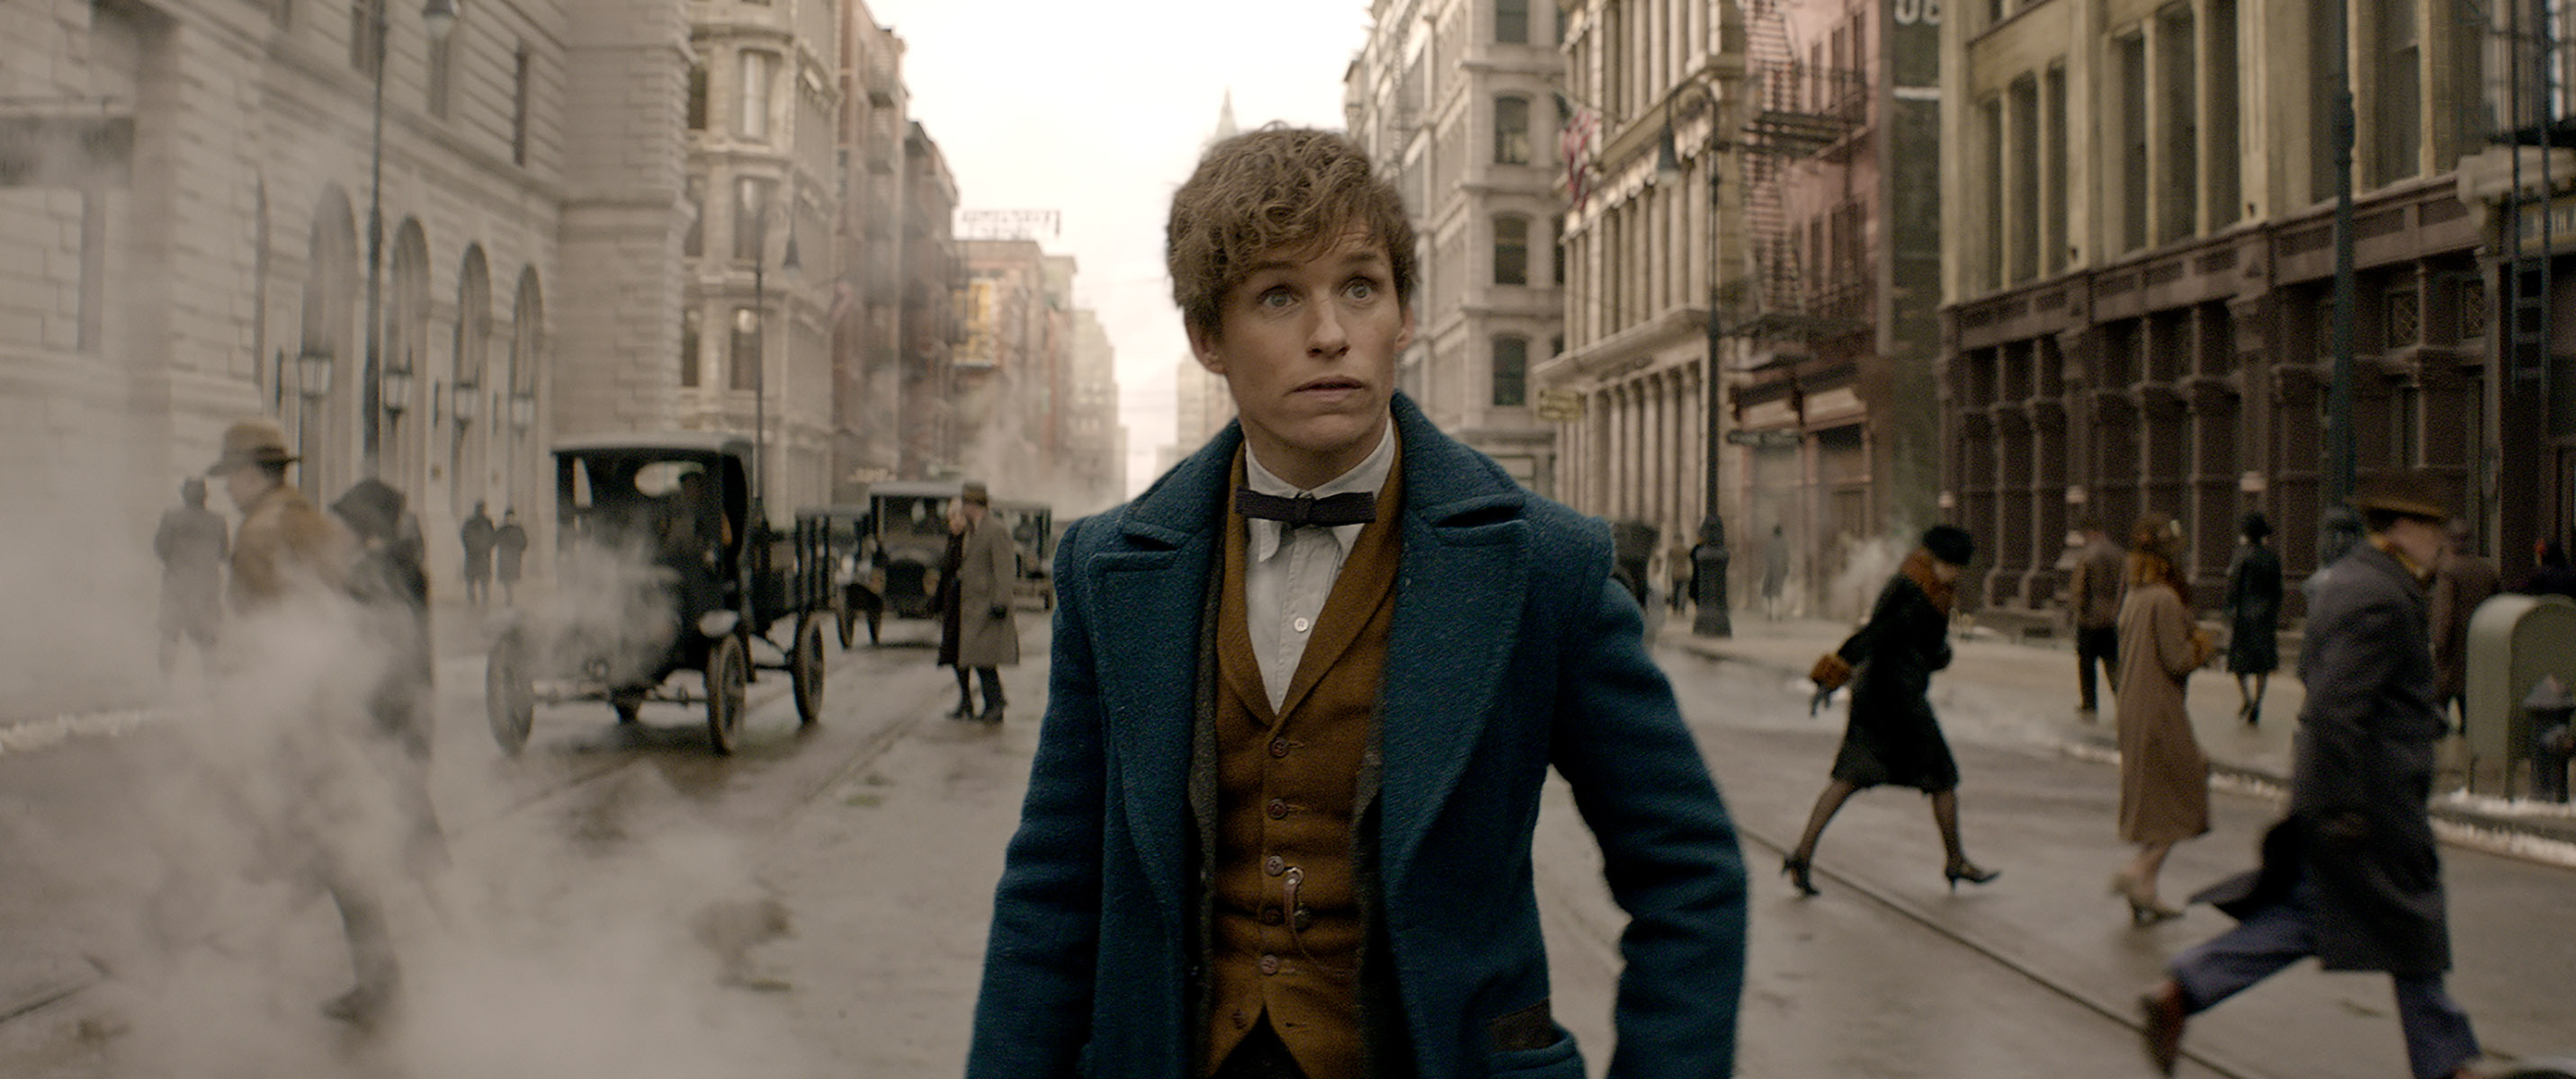 Online Fantastic Beasts And Where To Find Them Movie Bluray 2016